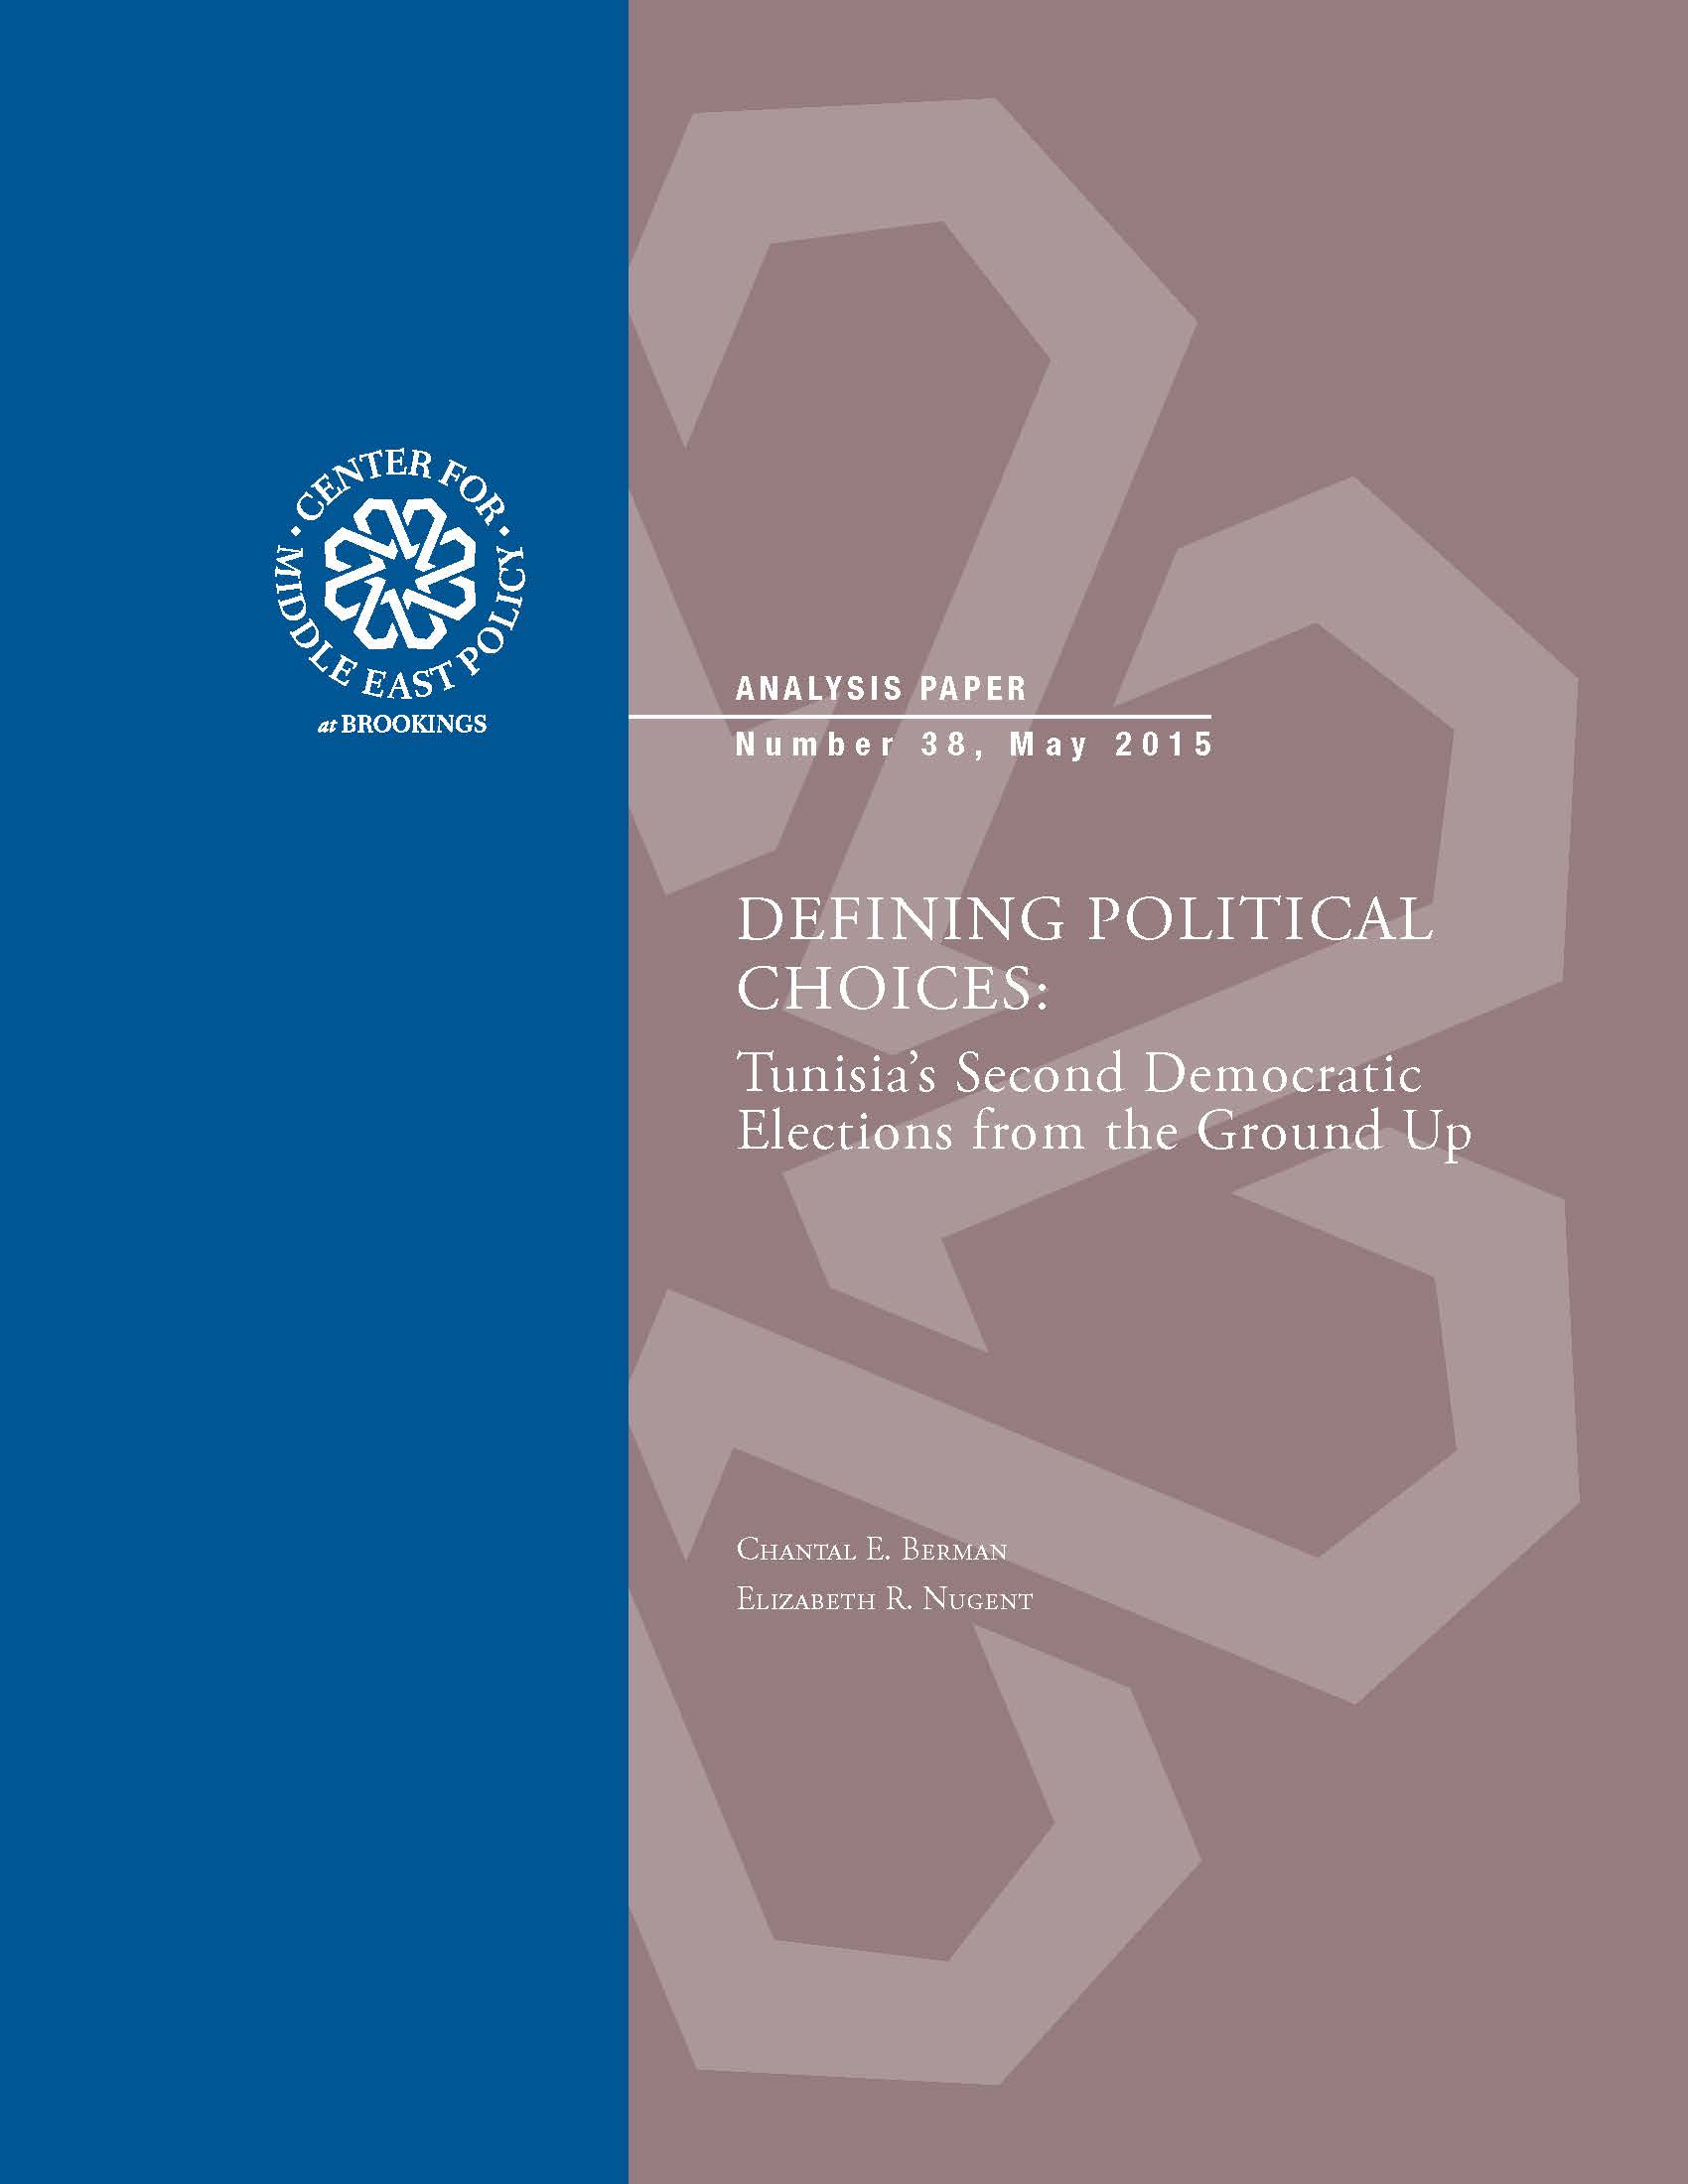 Cover from Defining Political Choices Berman Nugent